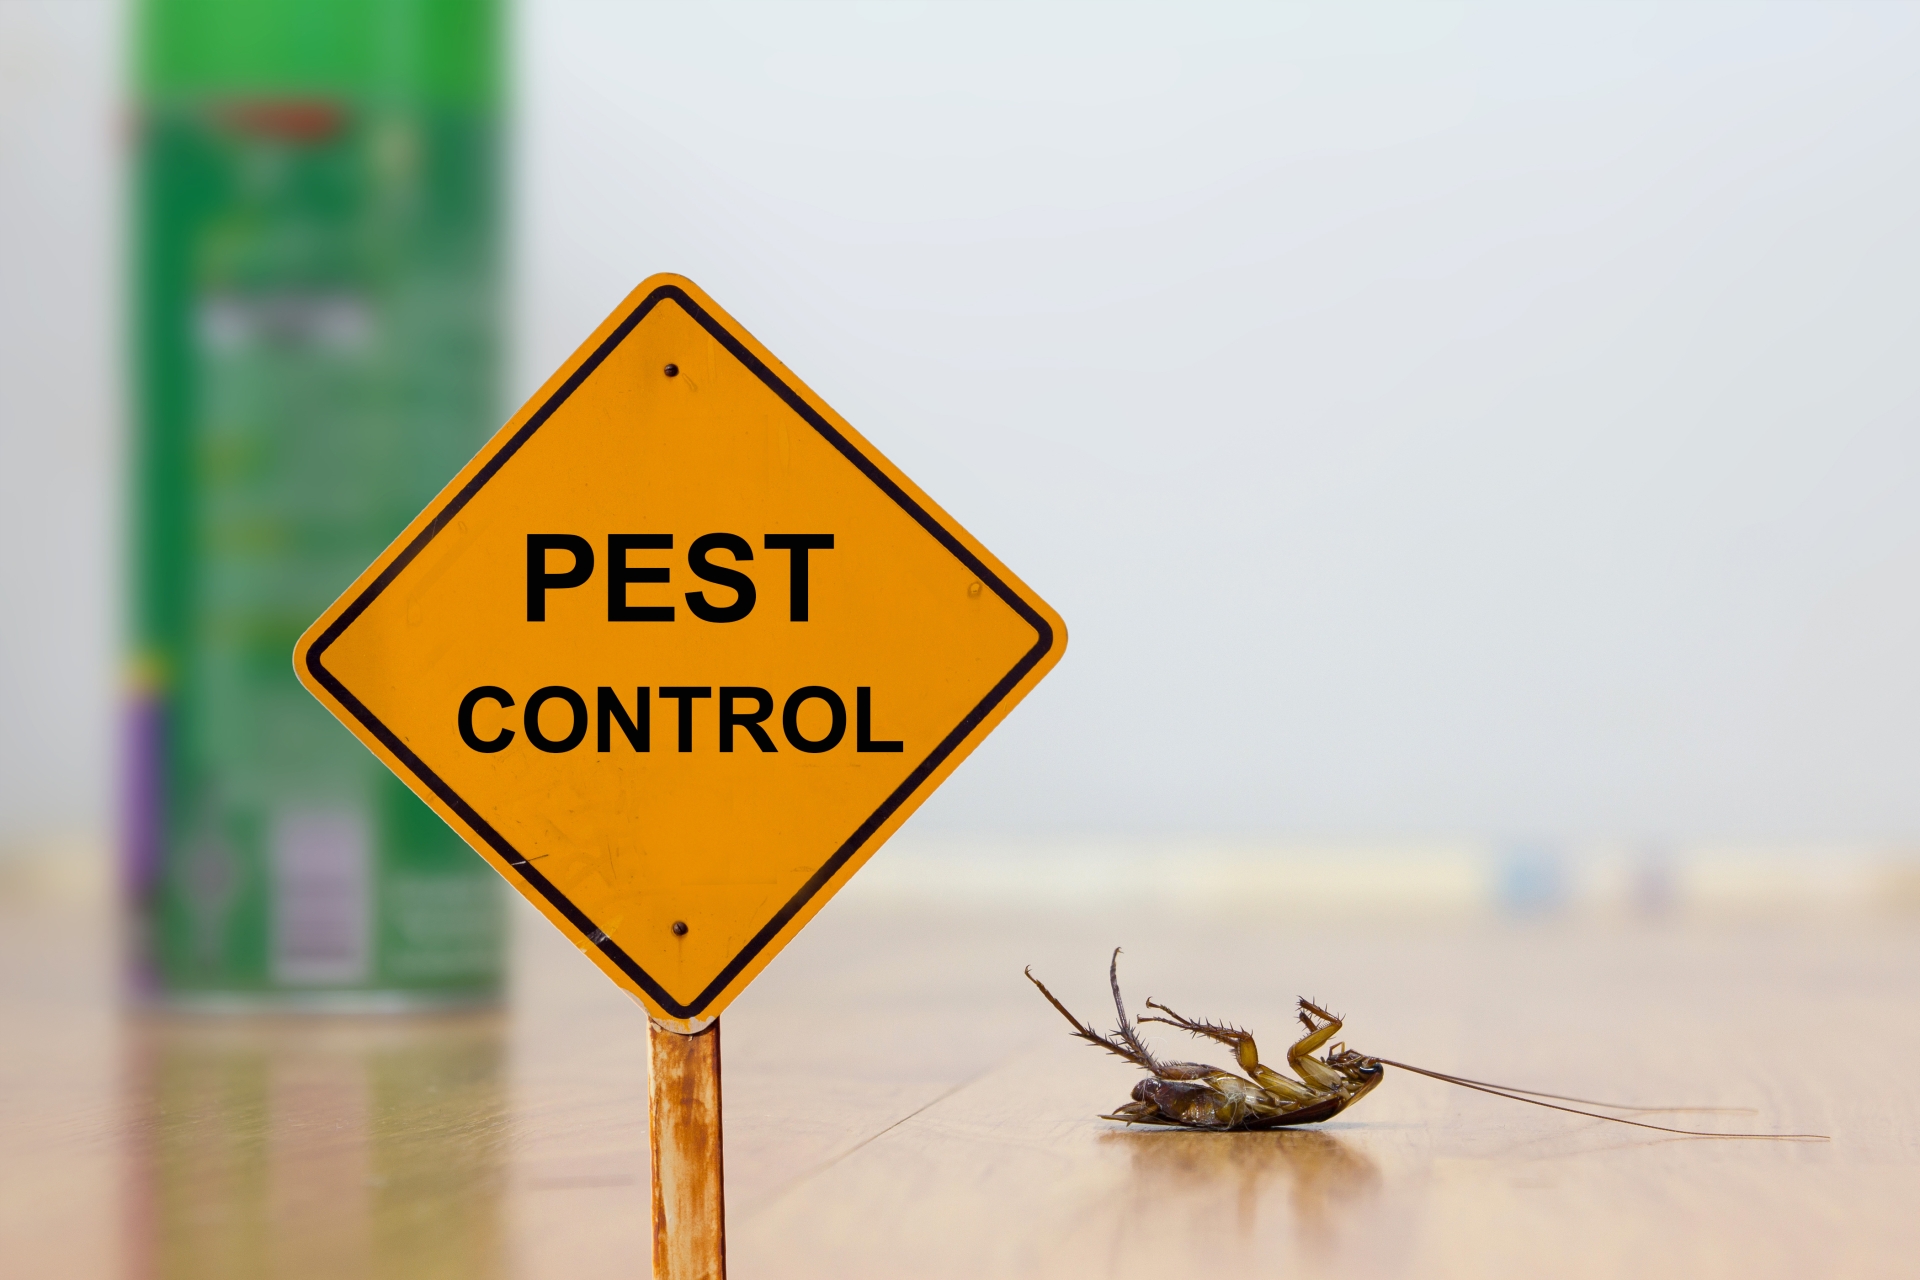 24 Hour Pest Control, Pest Control in Canbury, Coombe, KT2. Call Now 020 8166 9746